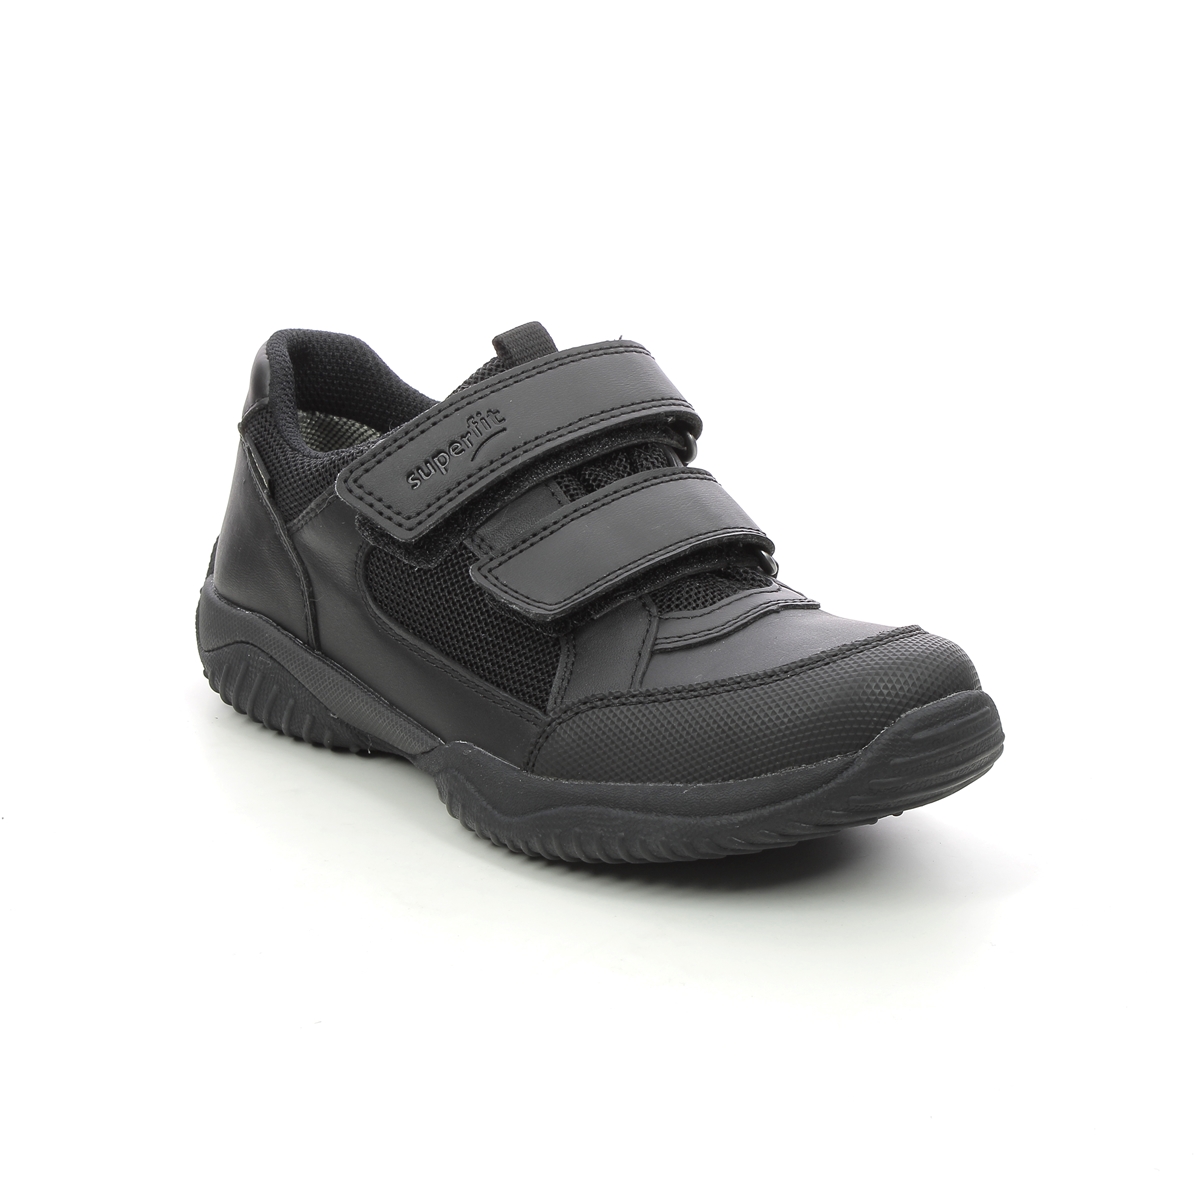 Superfit Storm Shoe Gtx Black Leather Kids Boys Casual Shoes 1009382-0000 In Size 32 In Plain Black Leather For kids